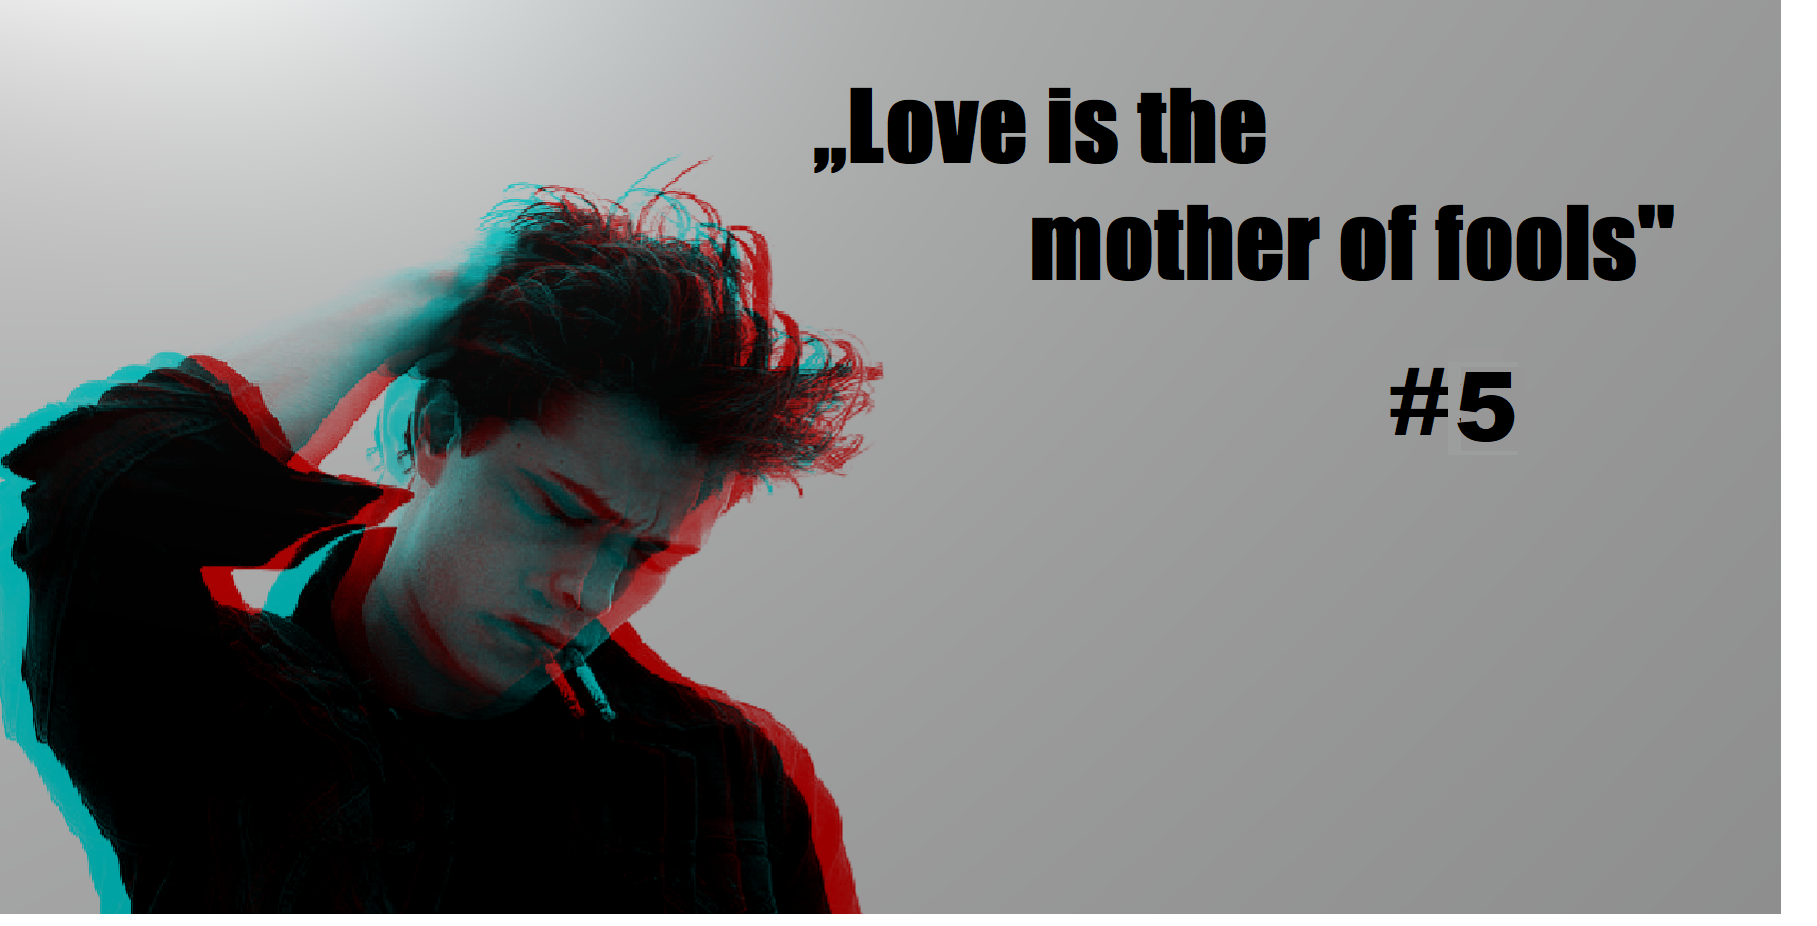 ,,Love is the mother of fools”#5